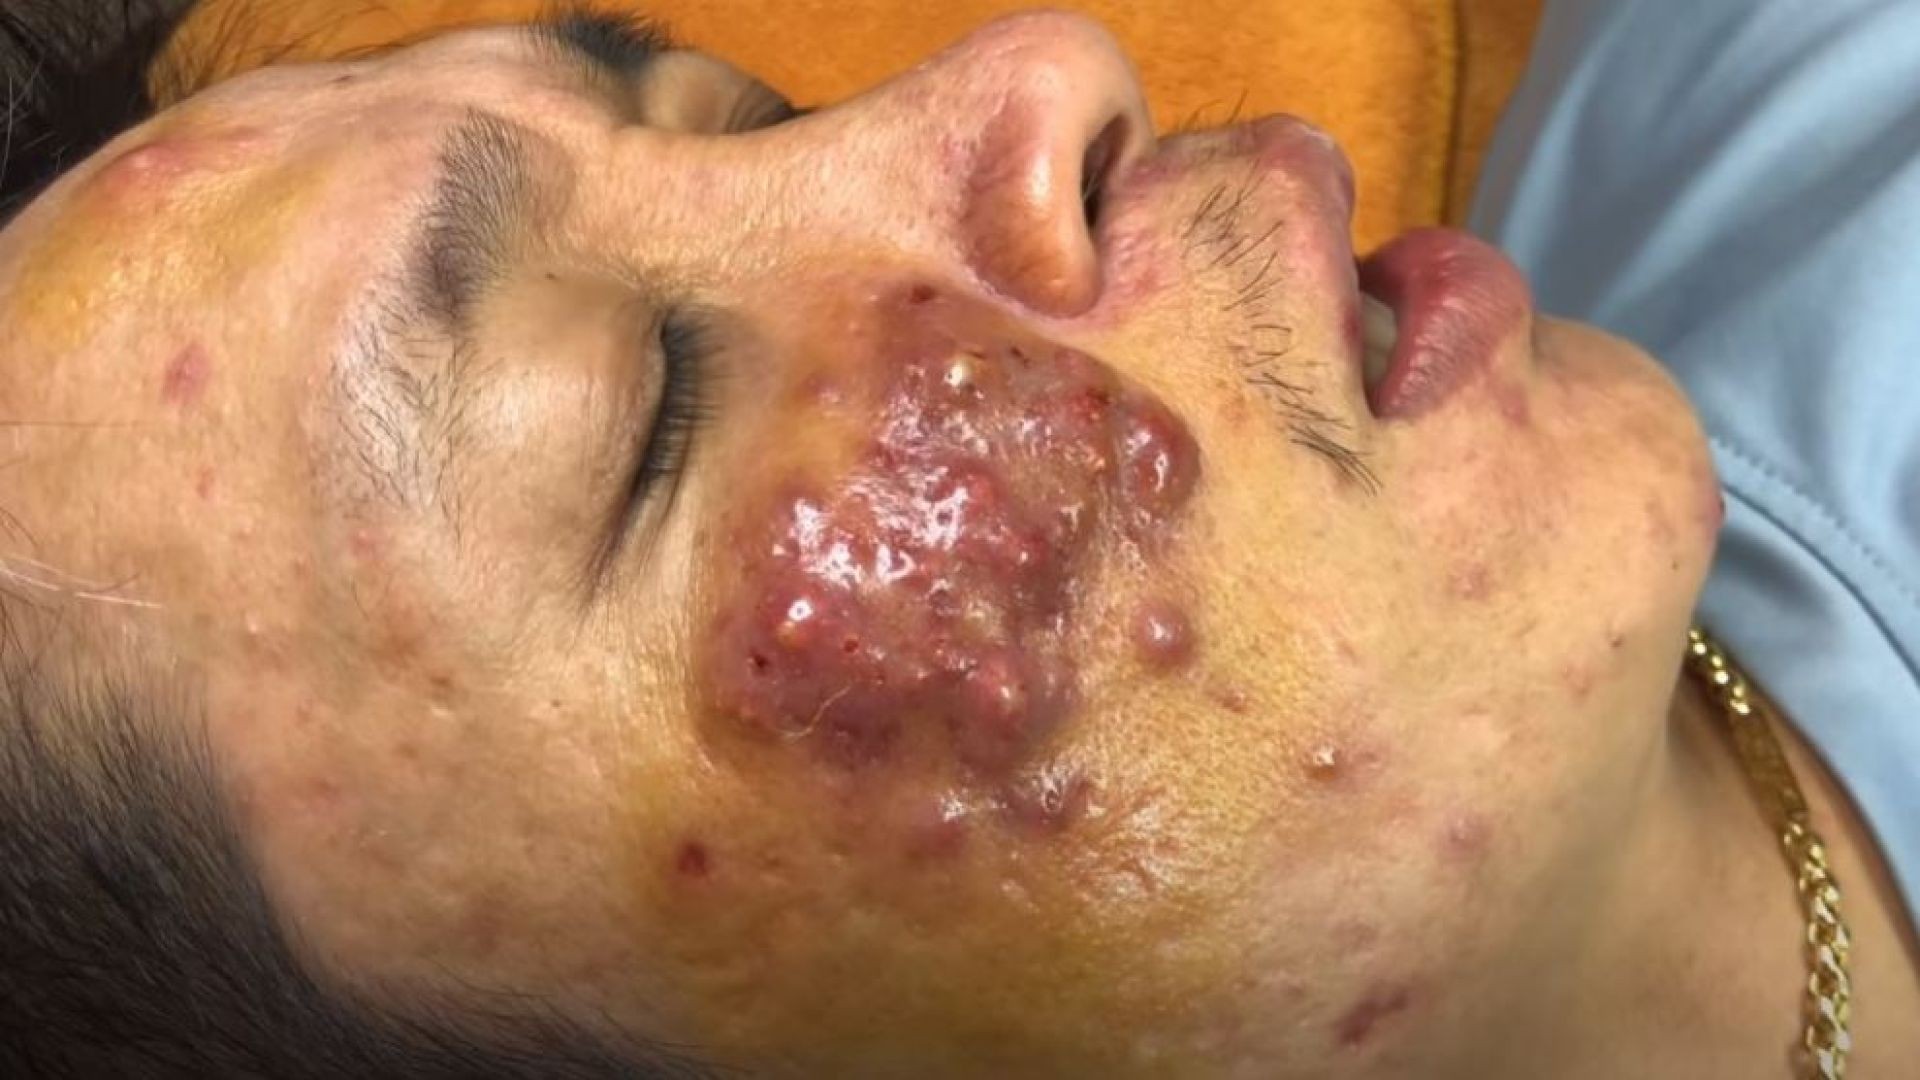 Severe case of inflamed cystic acne popping